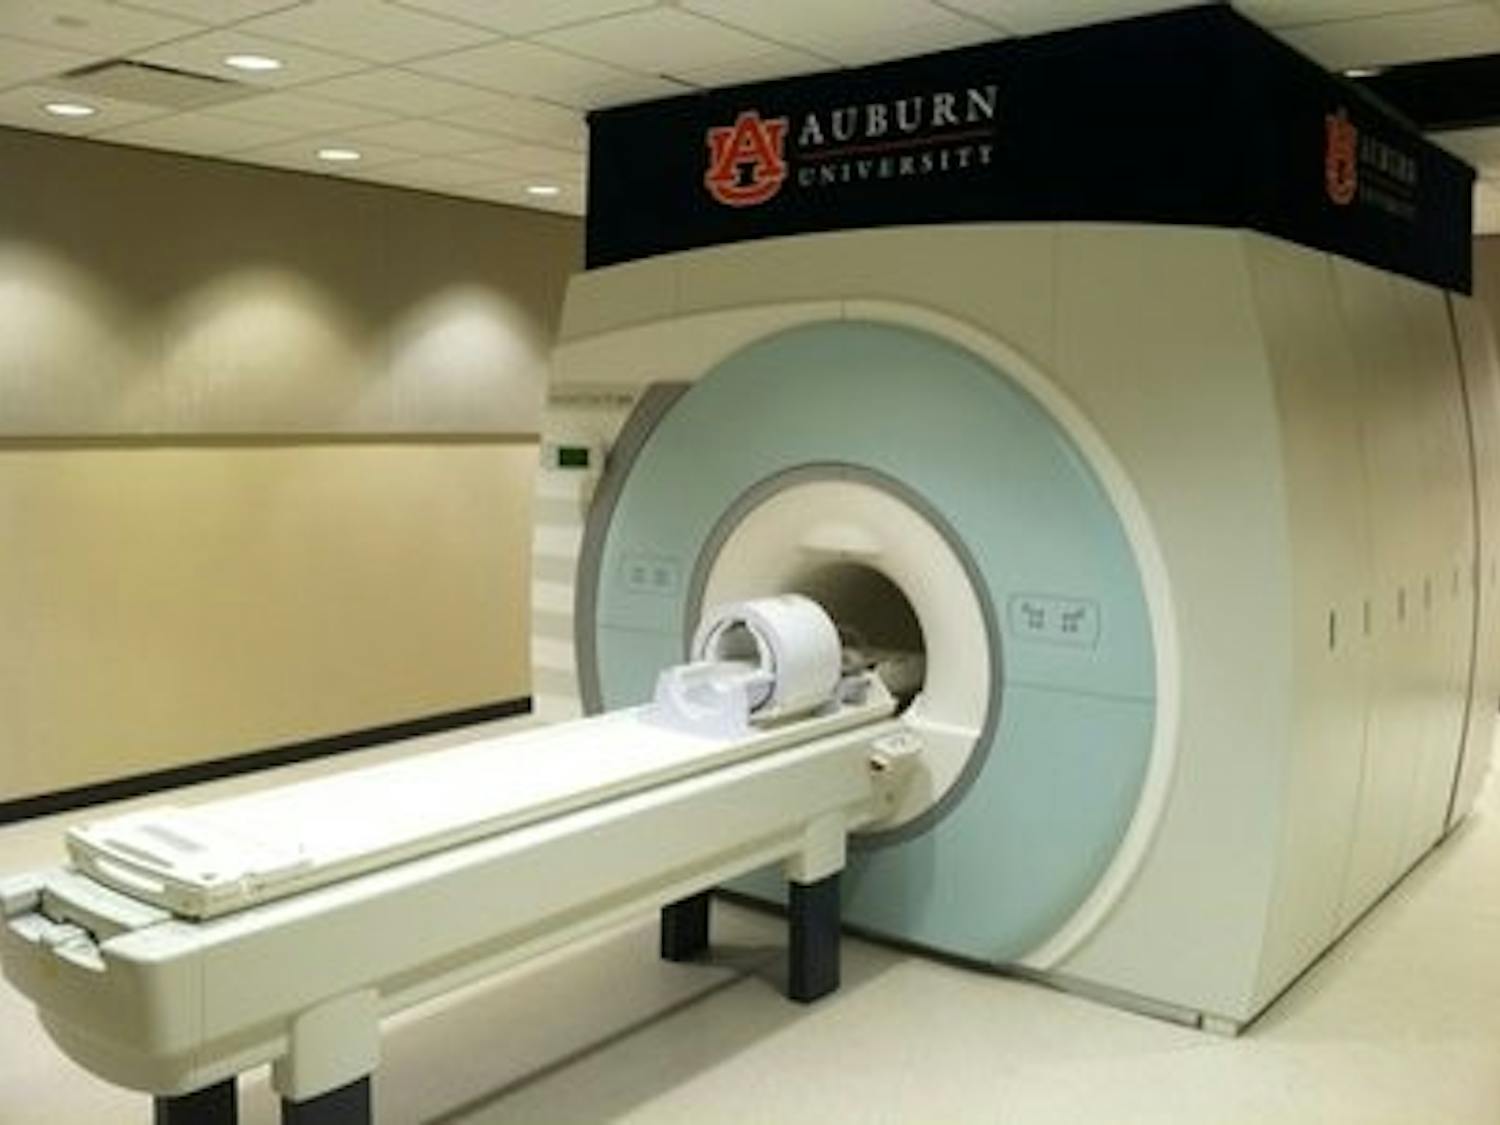 The new MRI center will be finished in mid-late July when the second MRI scanner is fully set up. (Courtesy of eng.auburn.edu/research/centers/mri/)